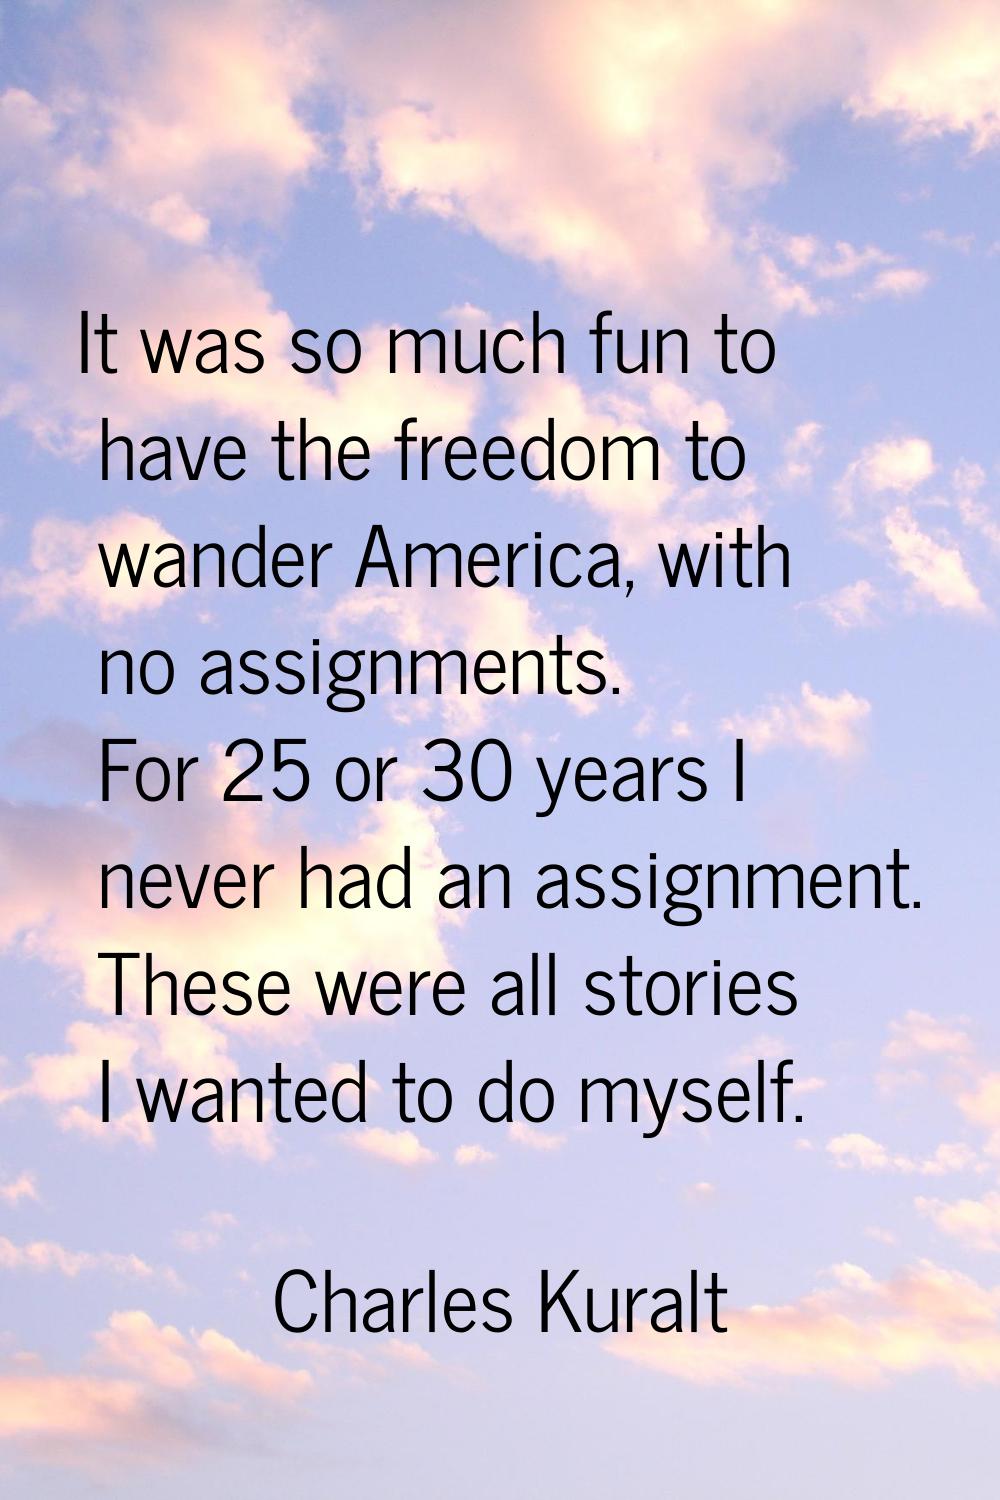 It was so much fun to have the freedom to wander America, with no assignments. For 25 or 30 years I